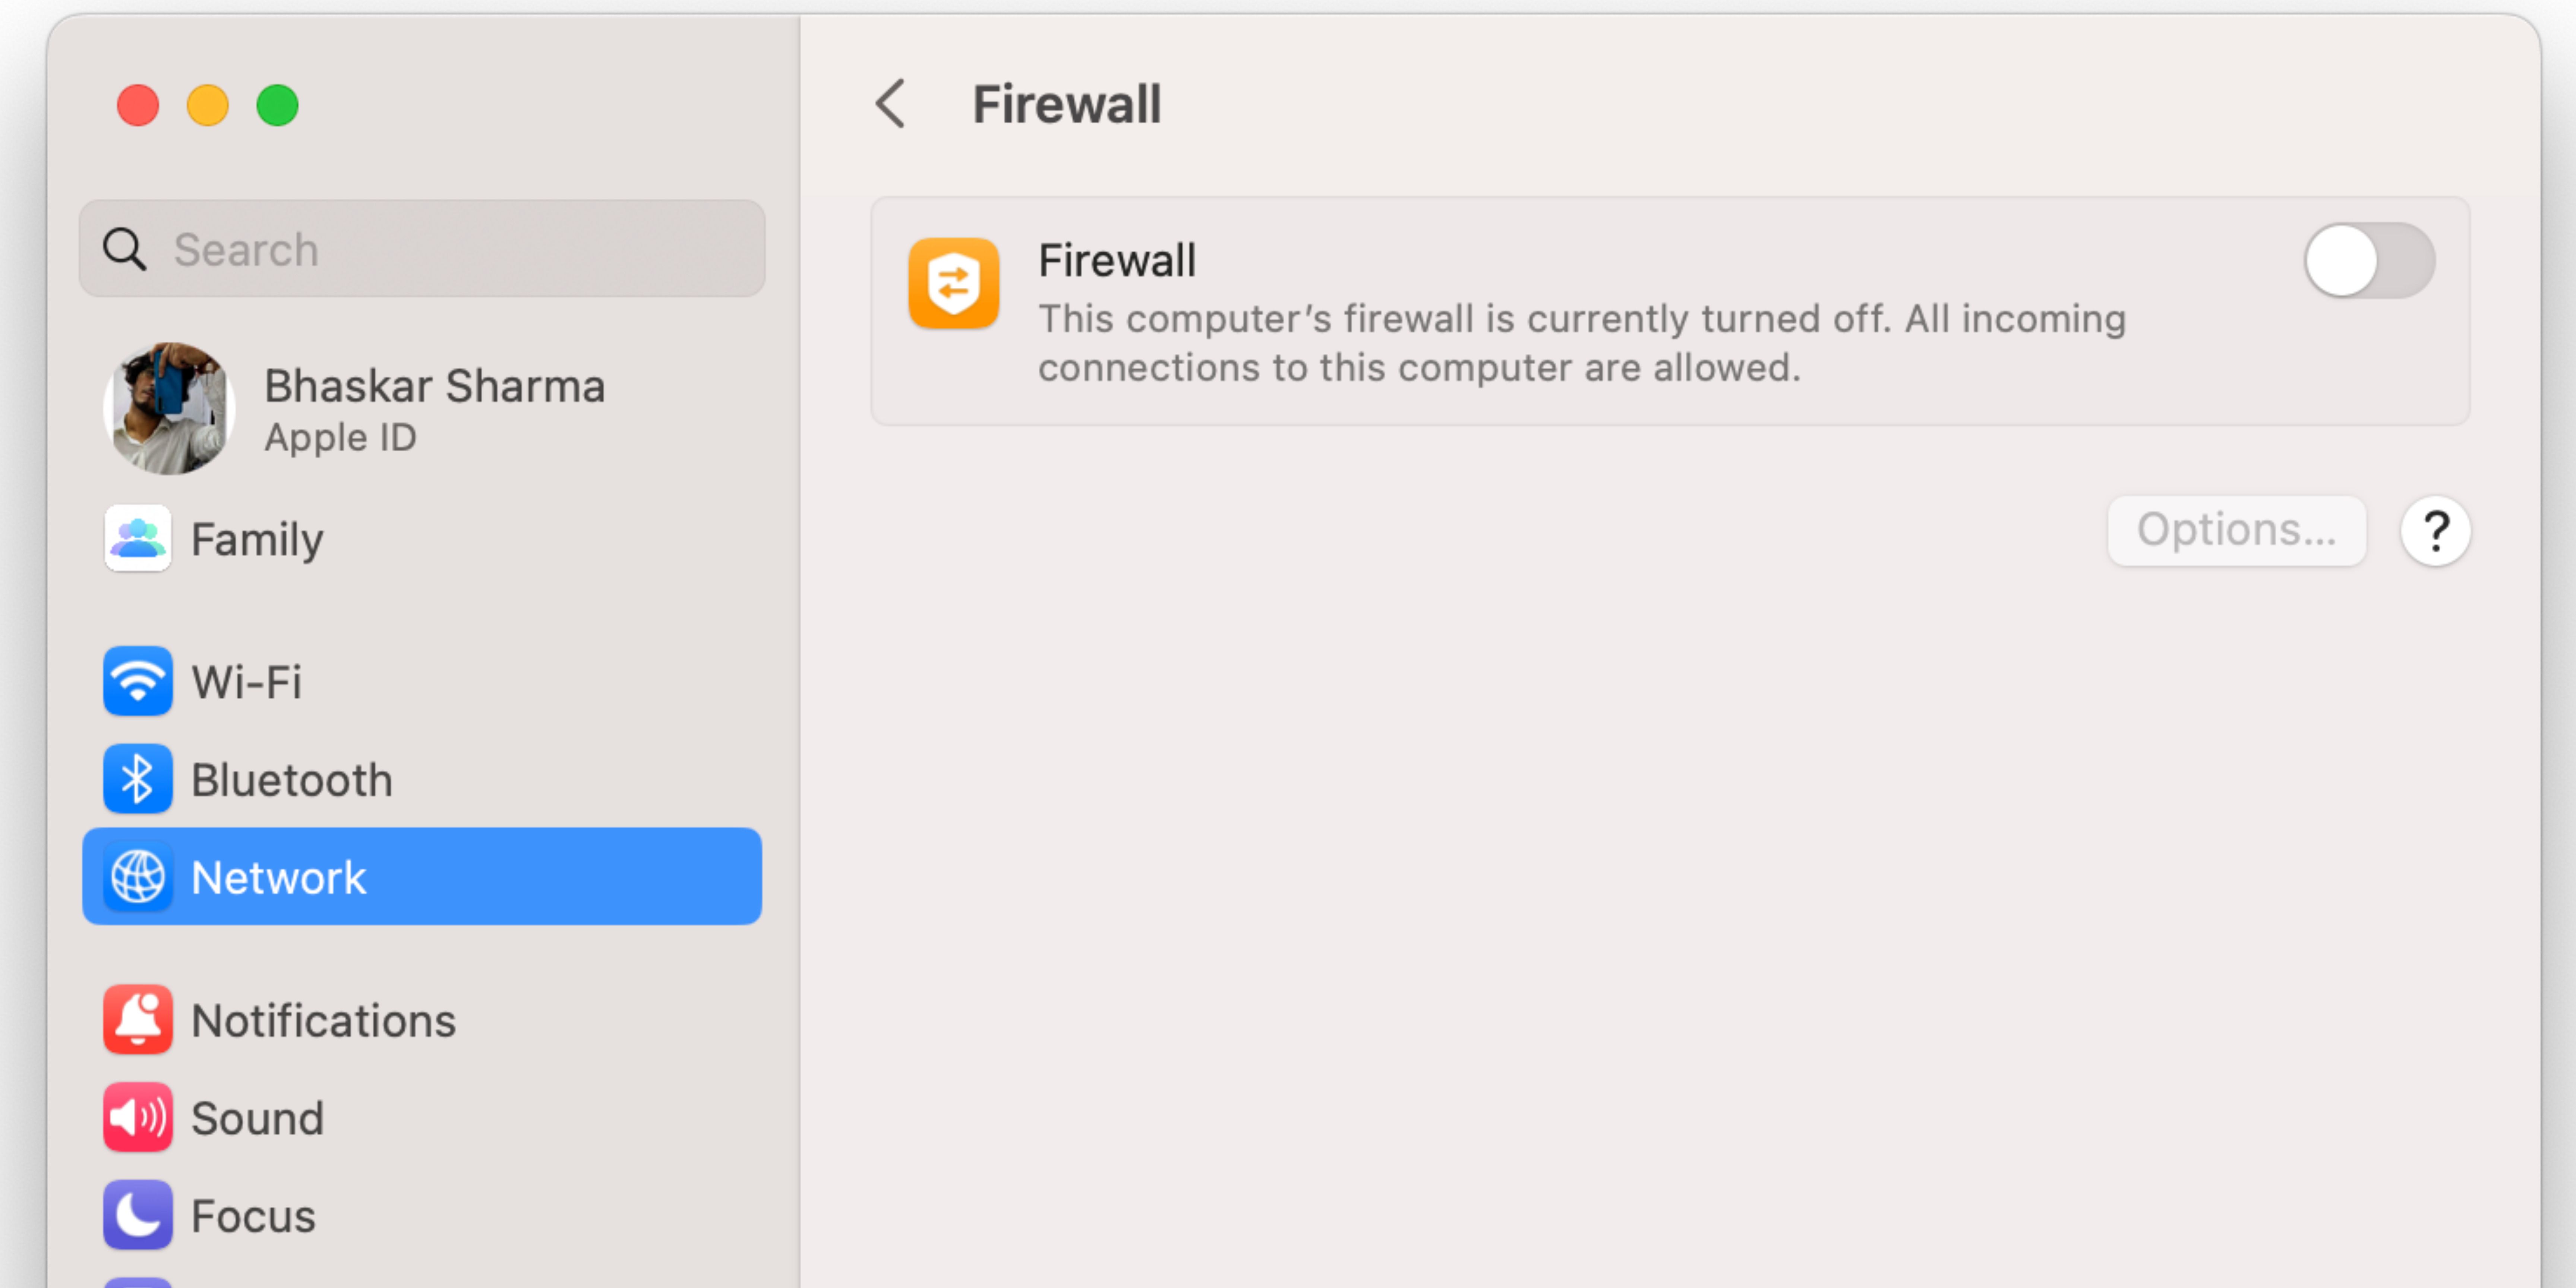 Open System Settings, go to Network, select Firewall, and toggle off the button next to Firewall